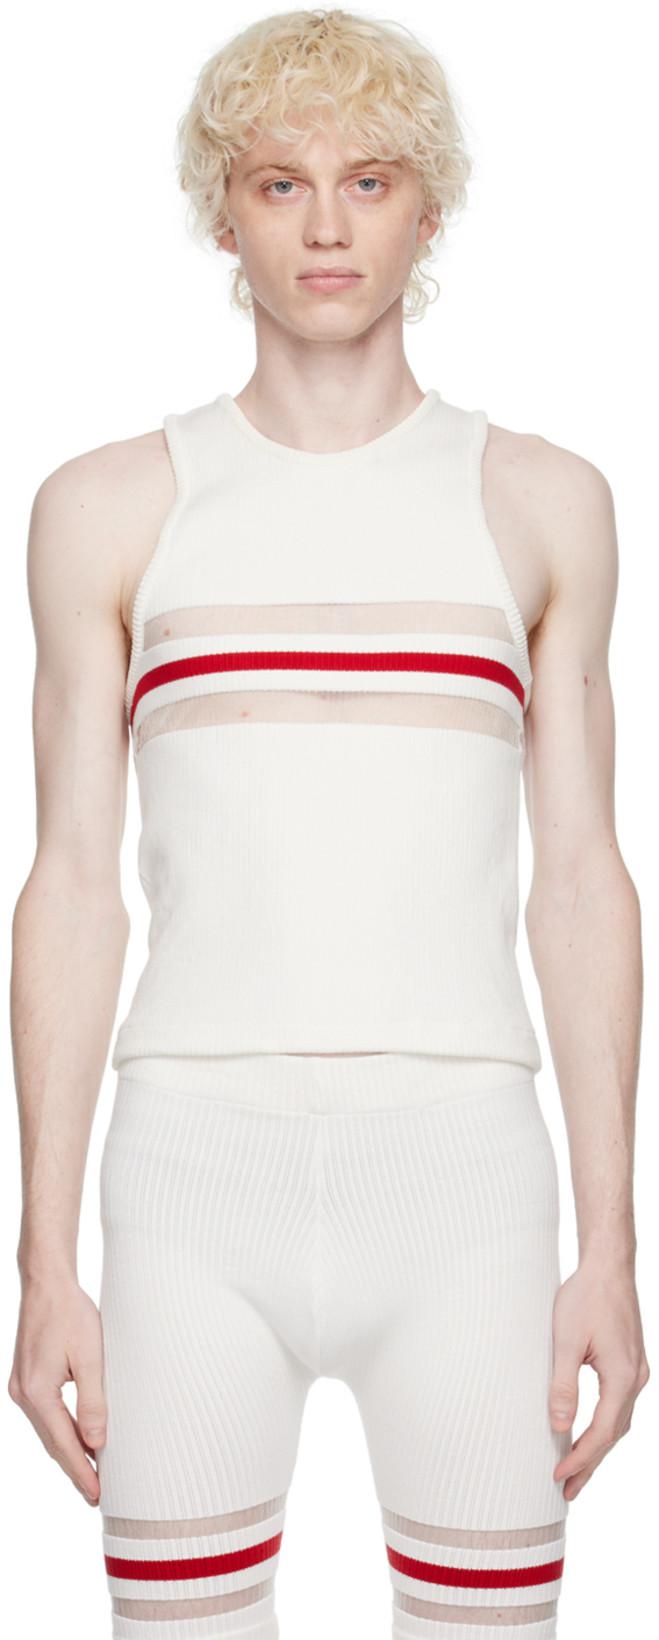 Off-White Stripe Tank Top by ALLED-MARTINEZ